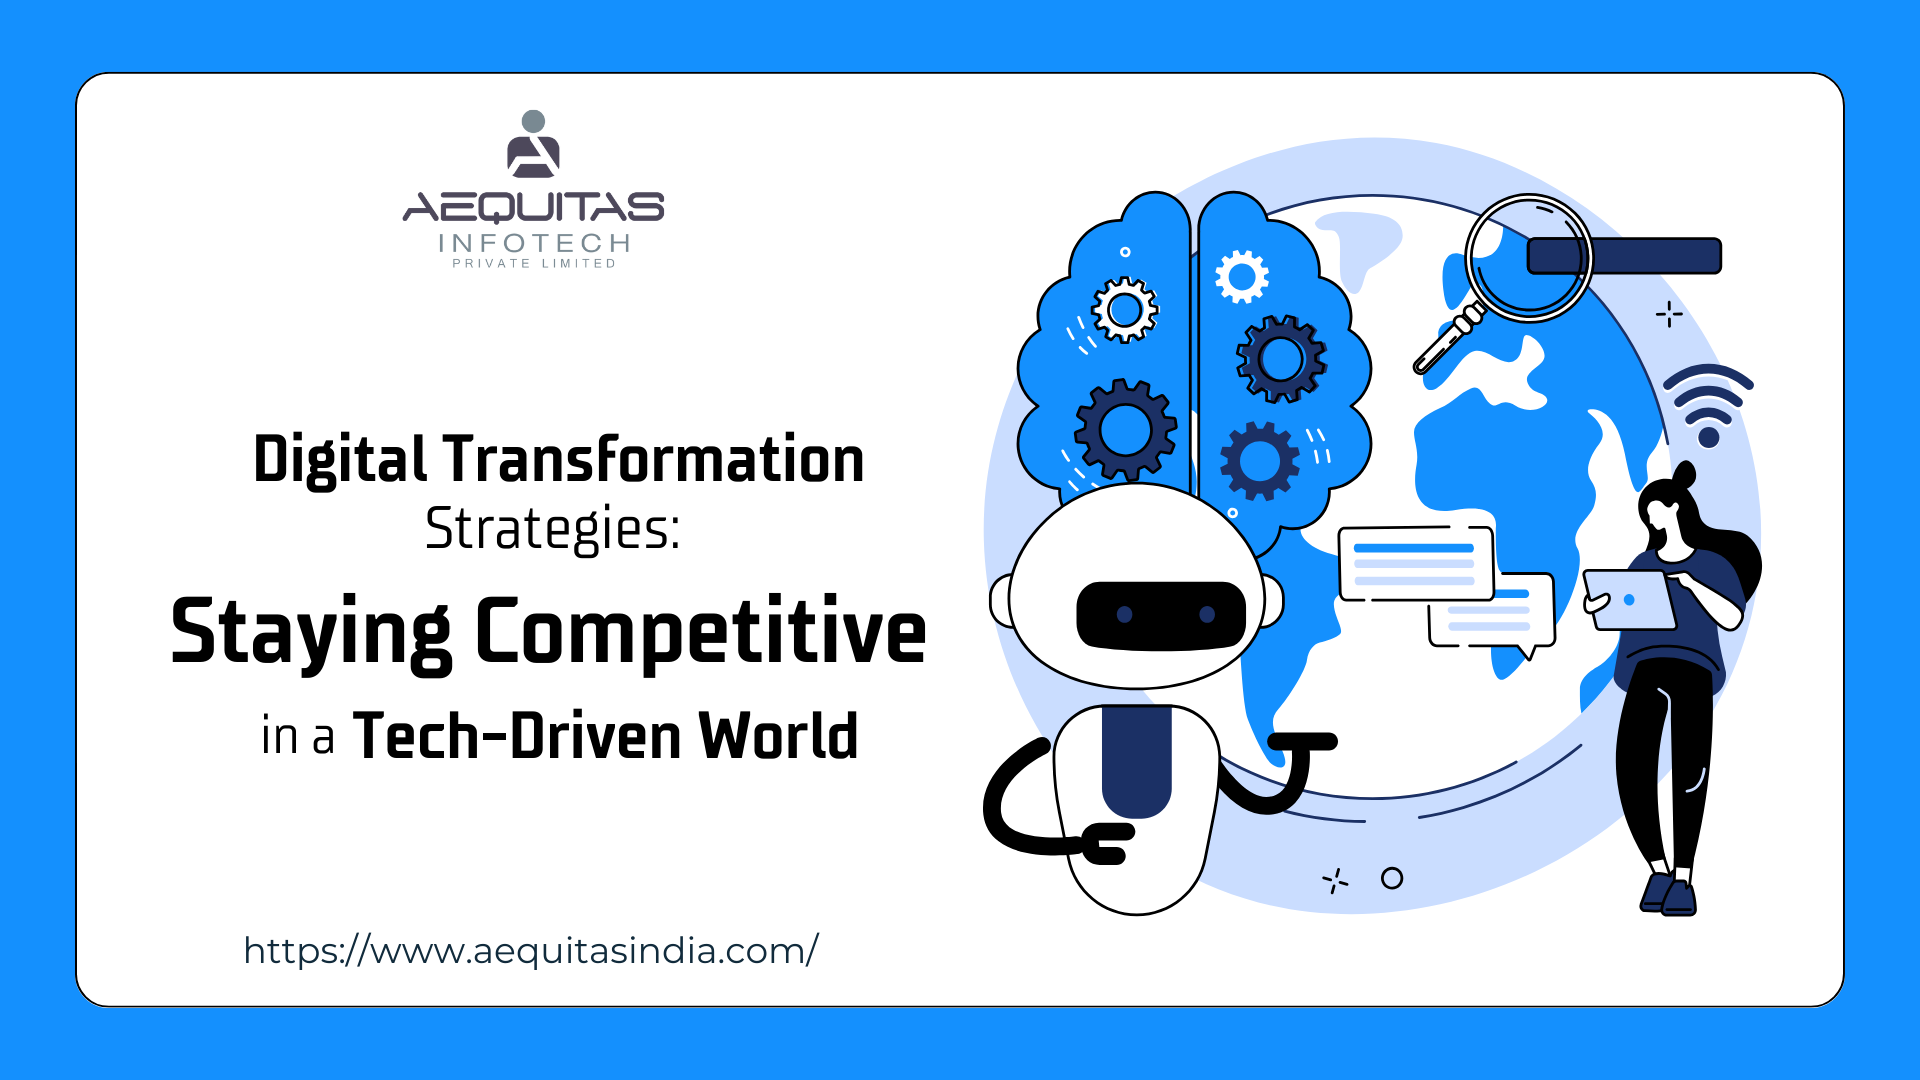 Digital Transformation Strategies - Staying Competitive in a Tech-Driven World